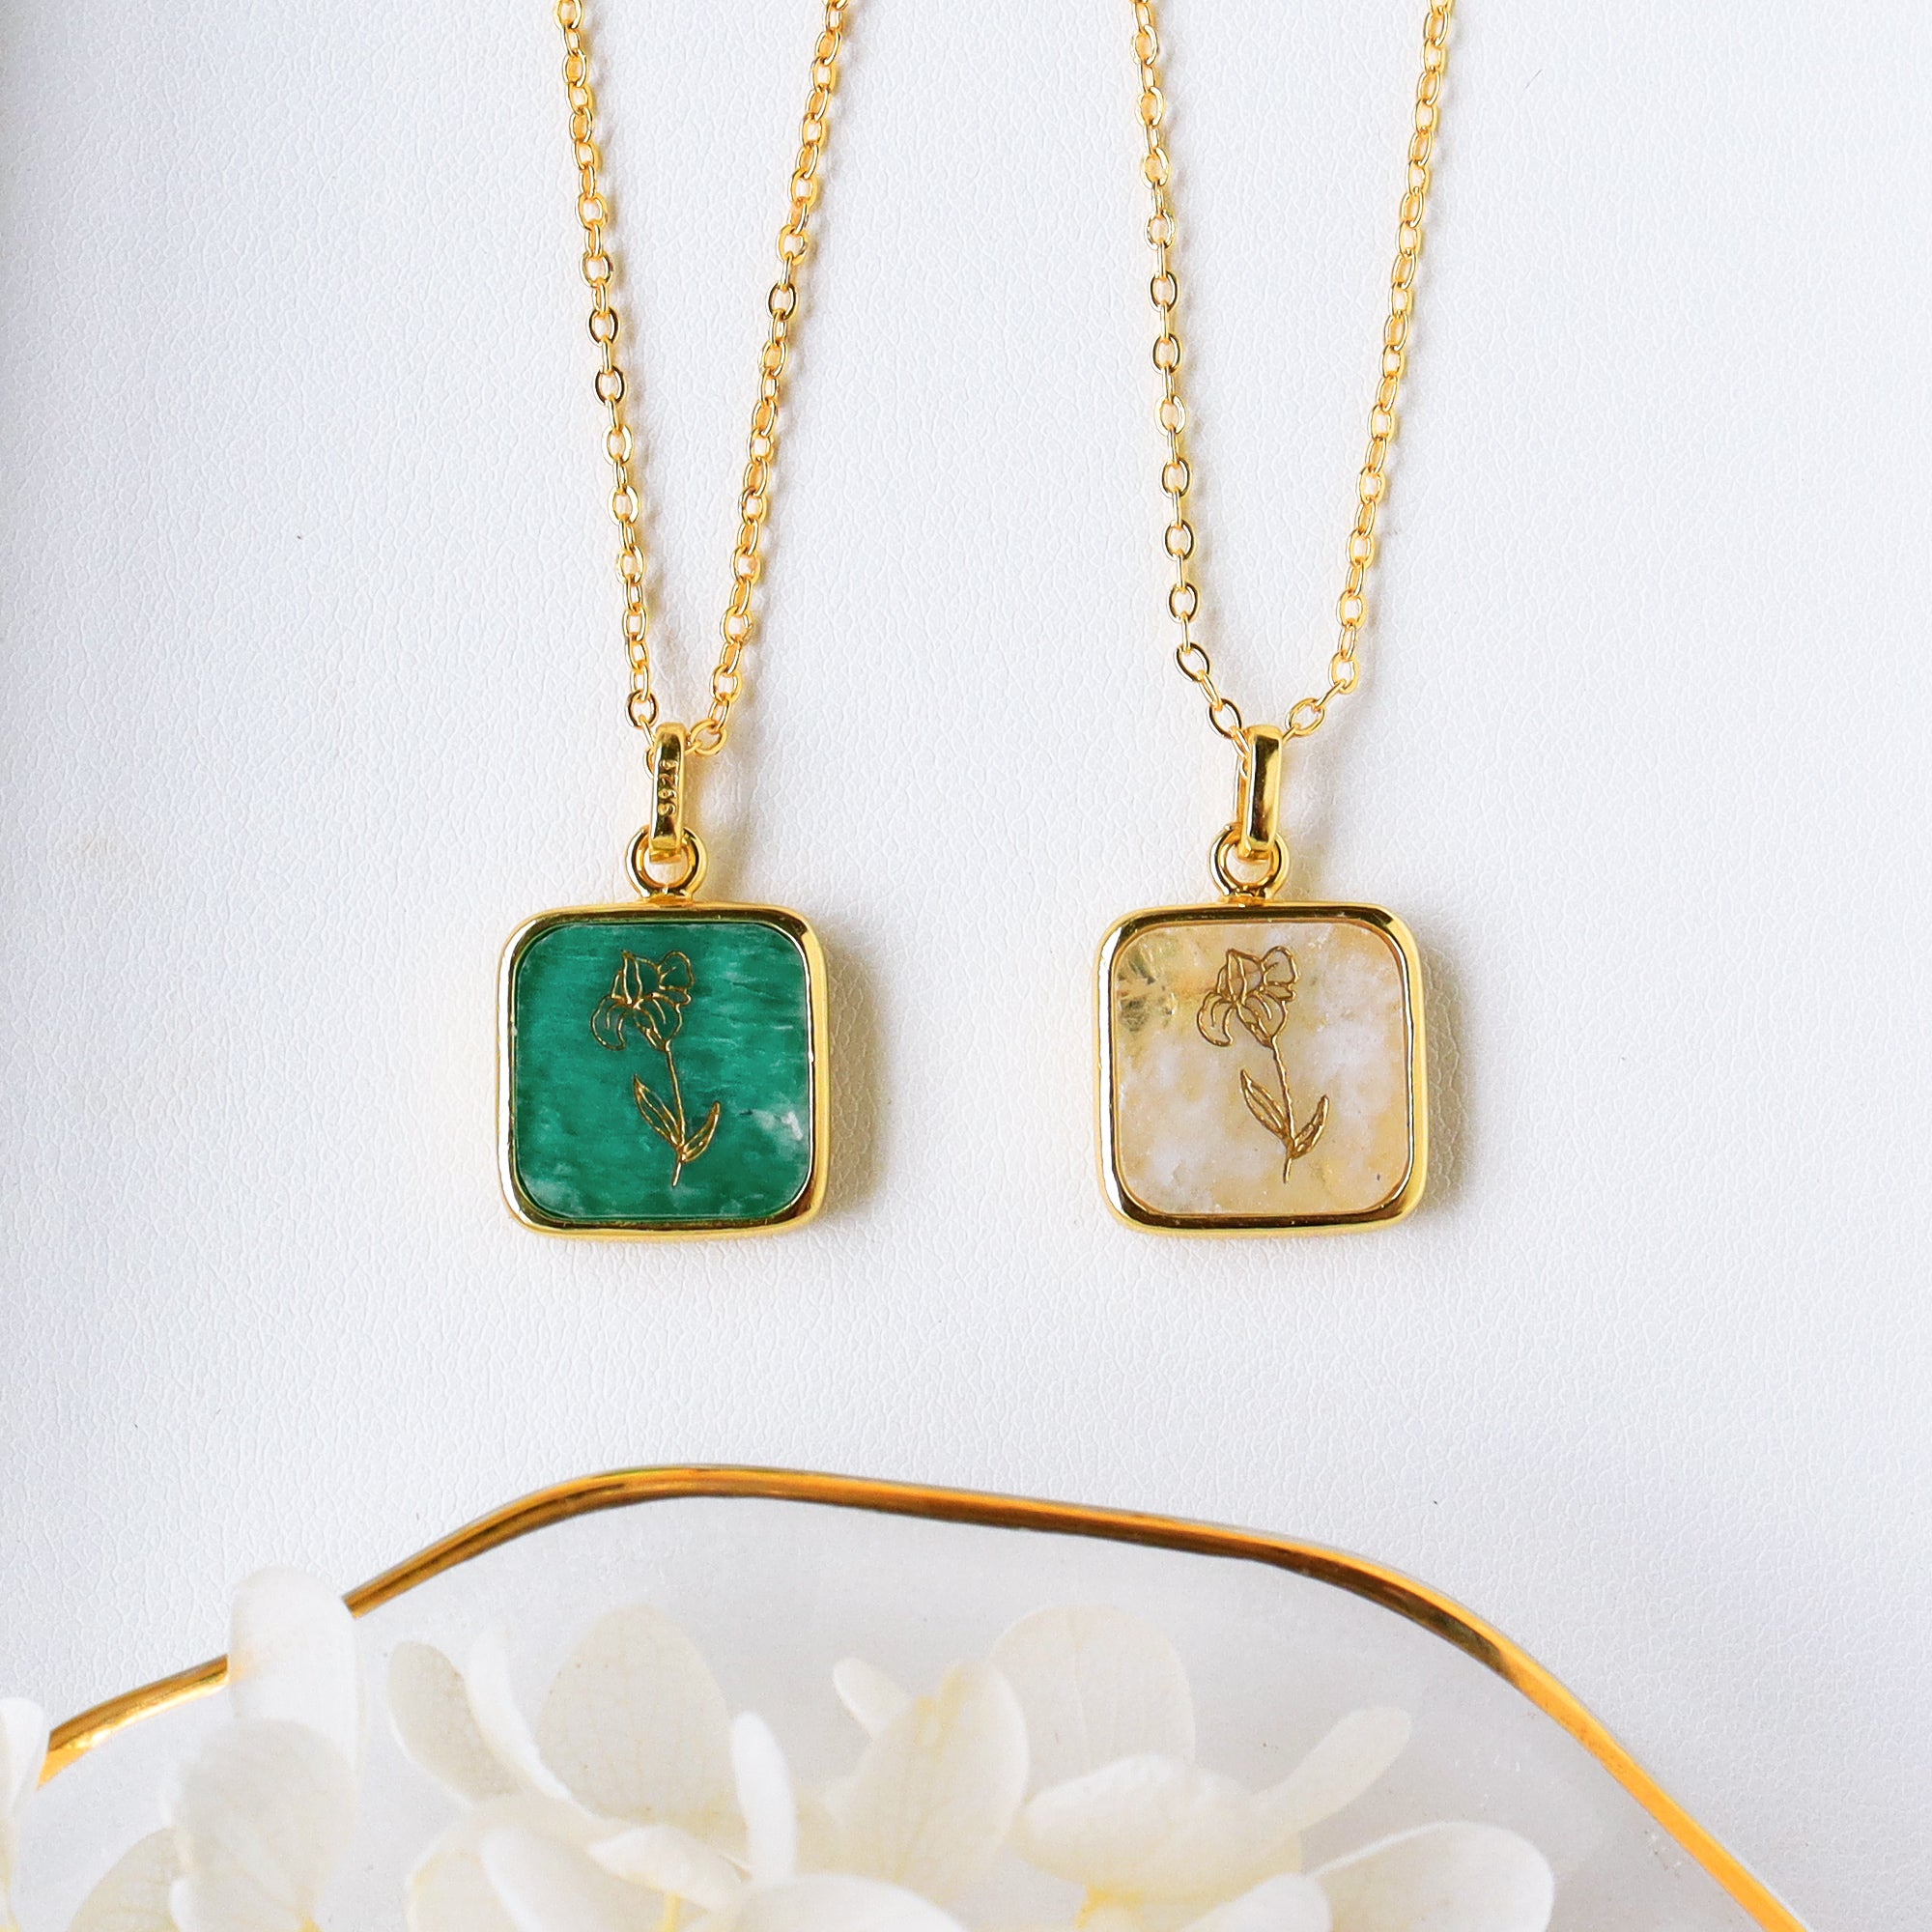 Wholesale 16" Gold Plated Square Gemstone Pendant Necklace, Carved Birth Month Flowers, Birthstone Jewelry KZ004